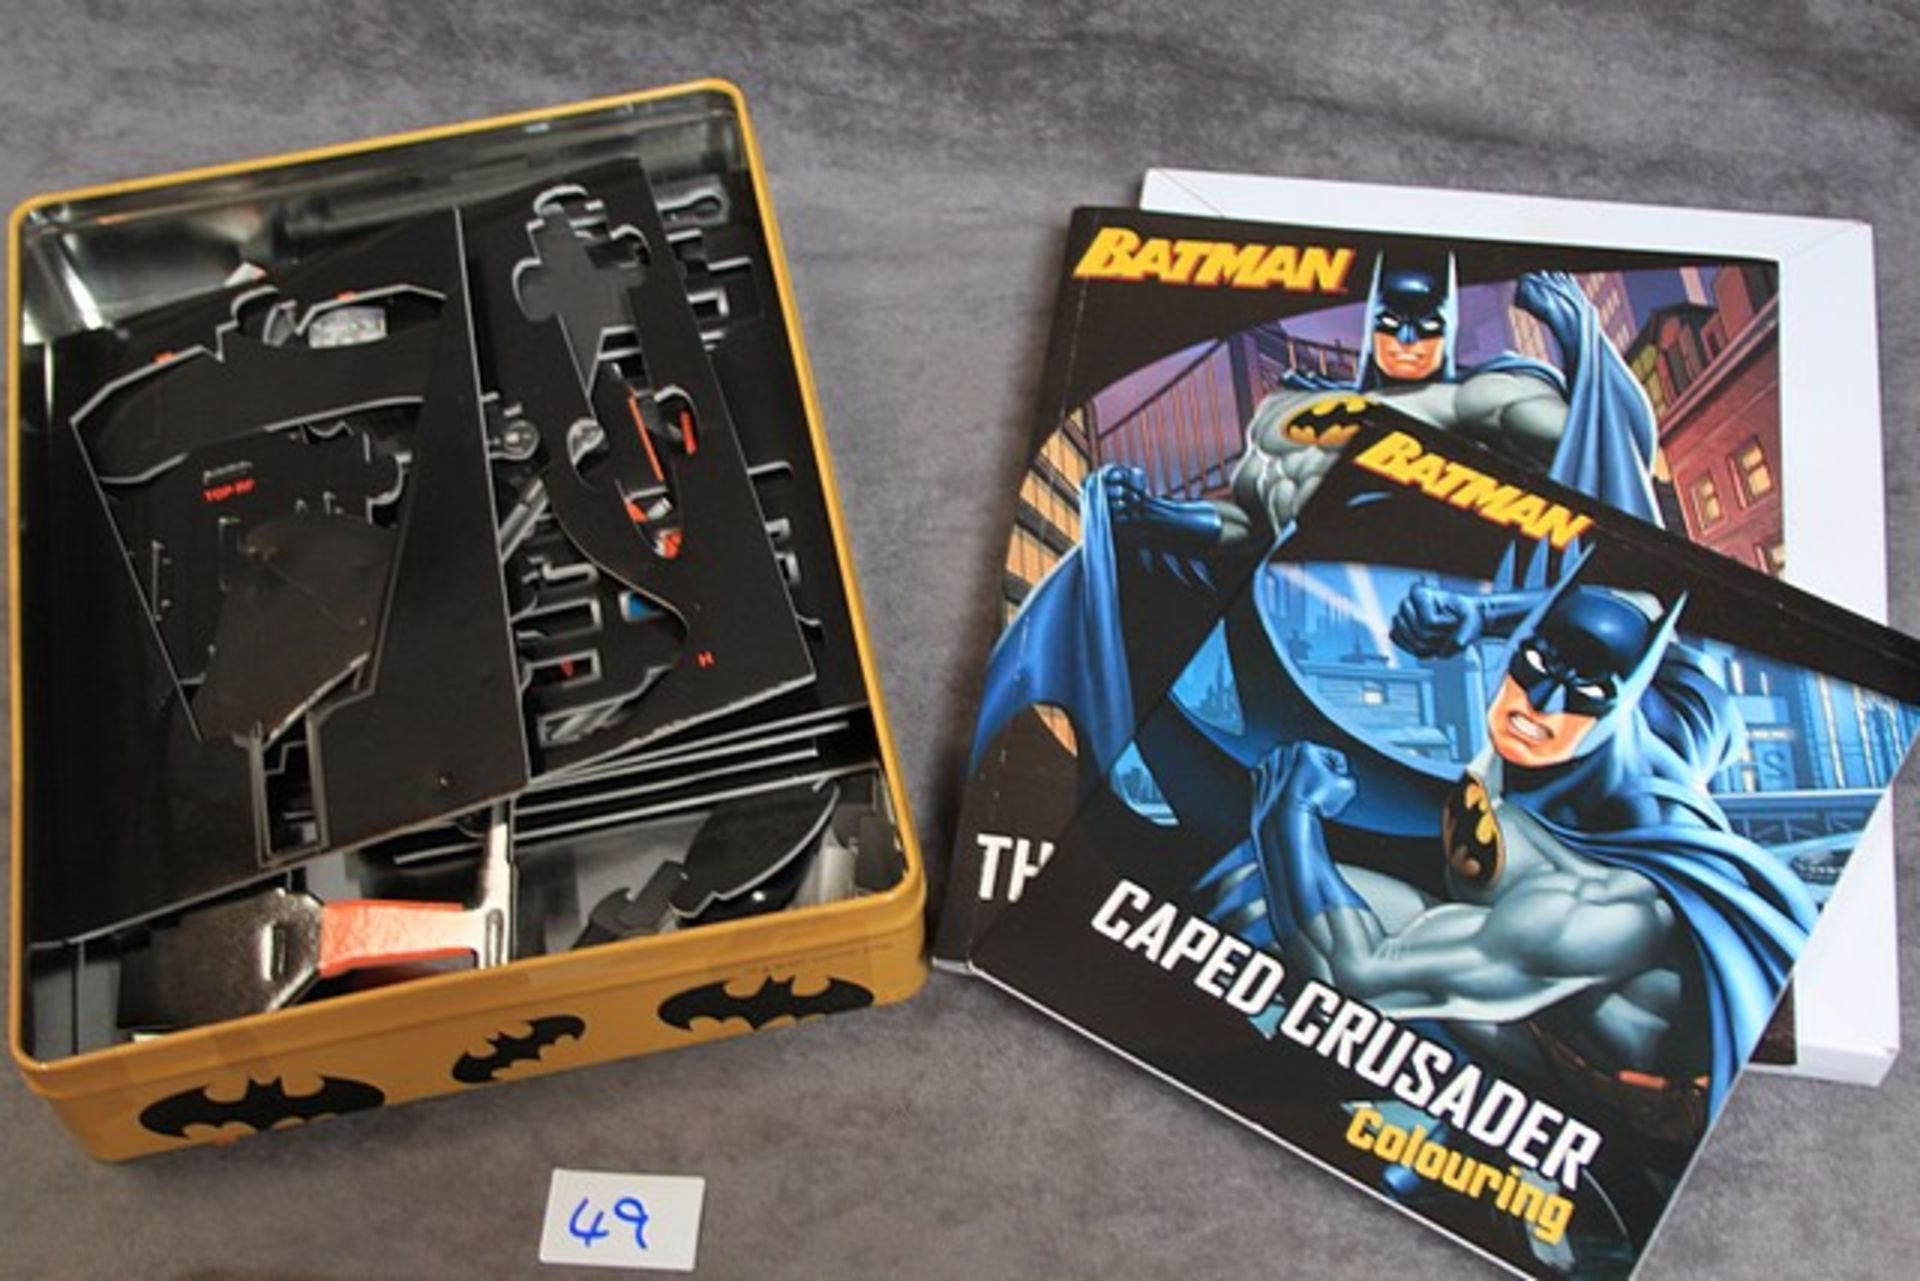 Tin Batman Batman Pressed Tin Box Contains Colour Book Story Book And A Neal Manning Paper Model X - Image 2 of 2